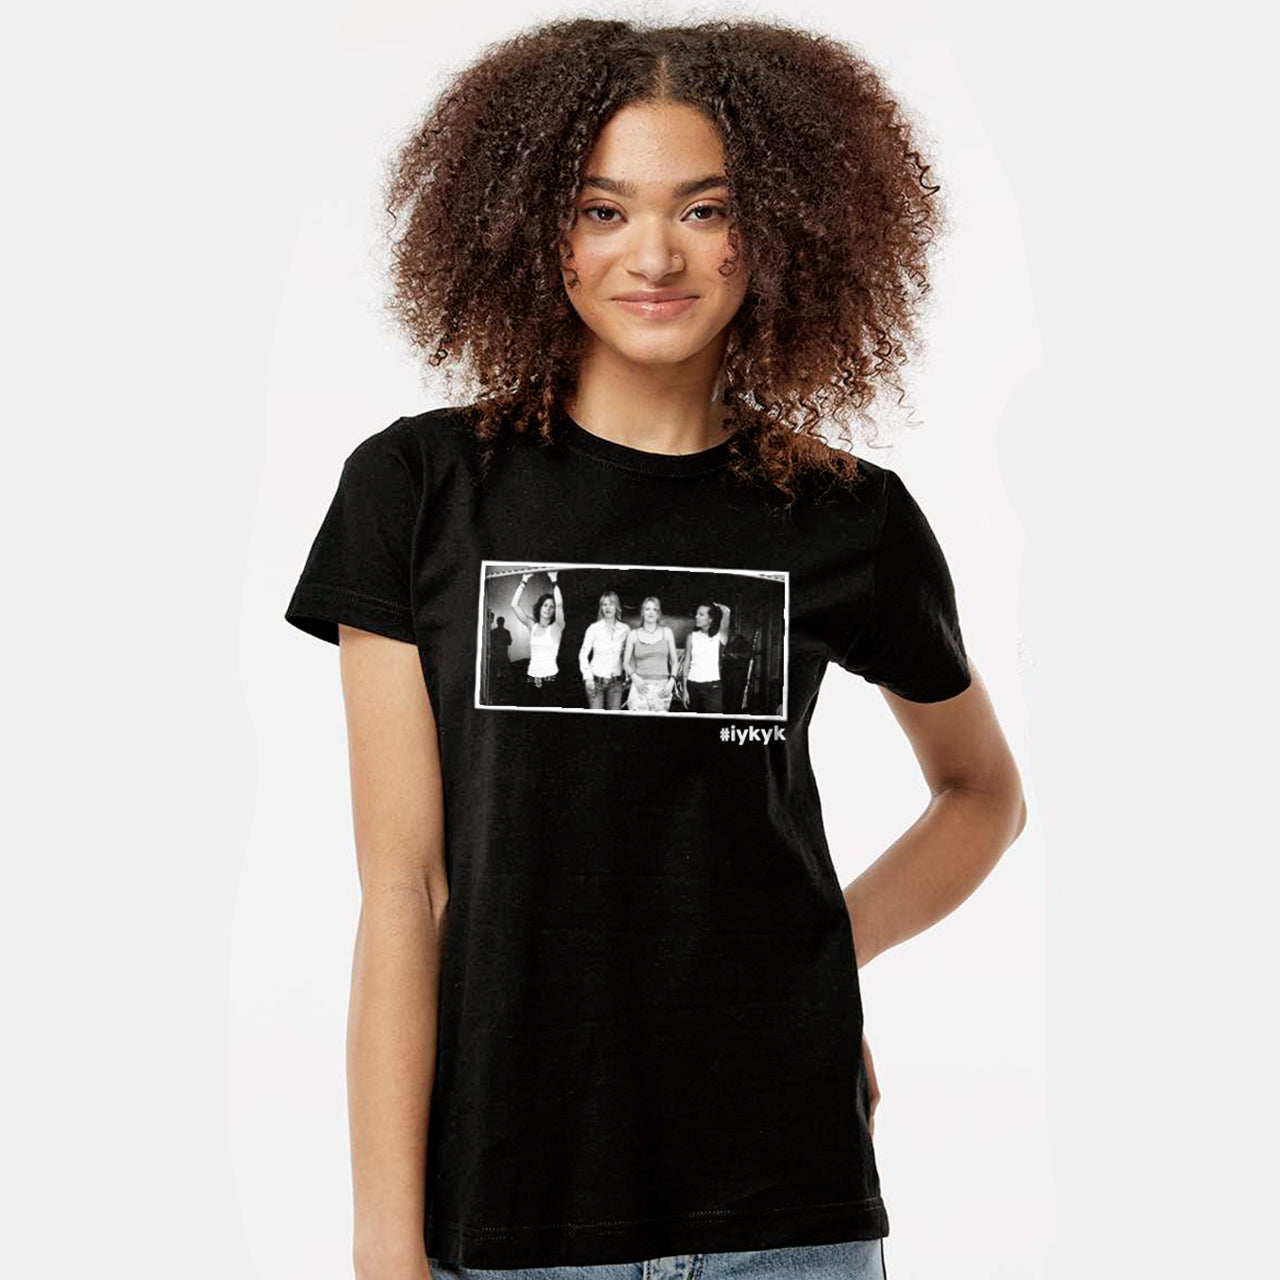 A female model wearing a black T-shirt. On the front is a black and white image of characters from the TV series "The L Word." Under the image is the hashtag #ifkyk